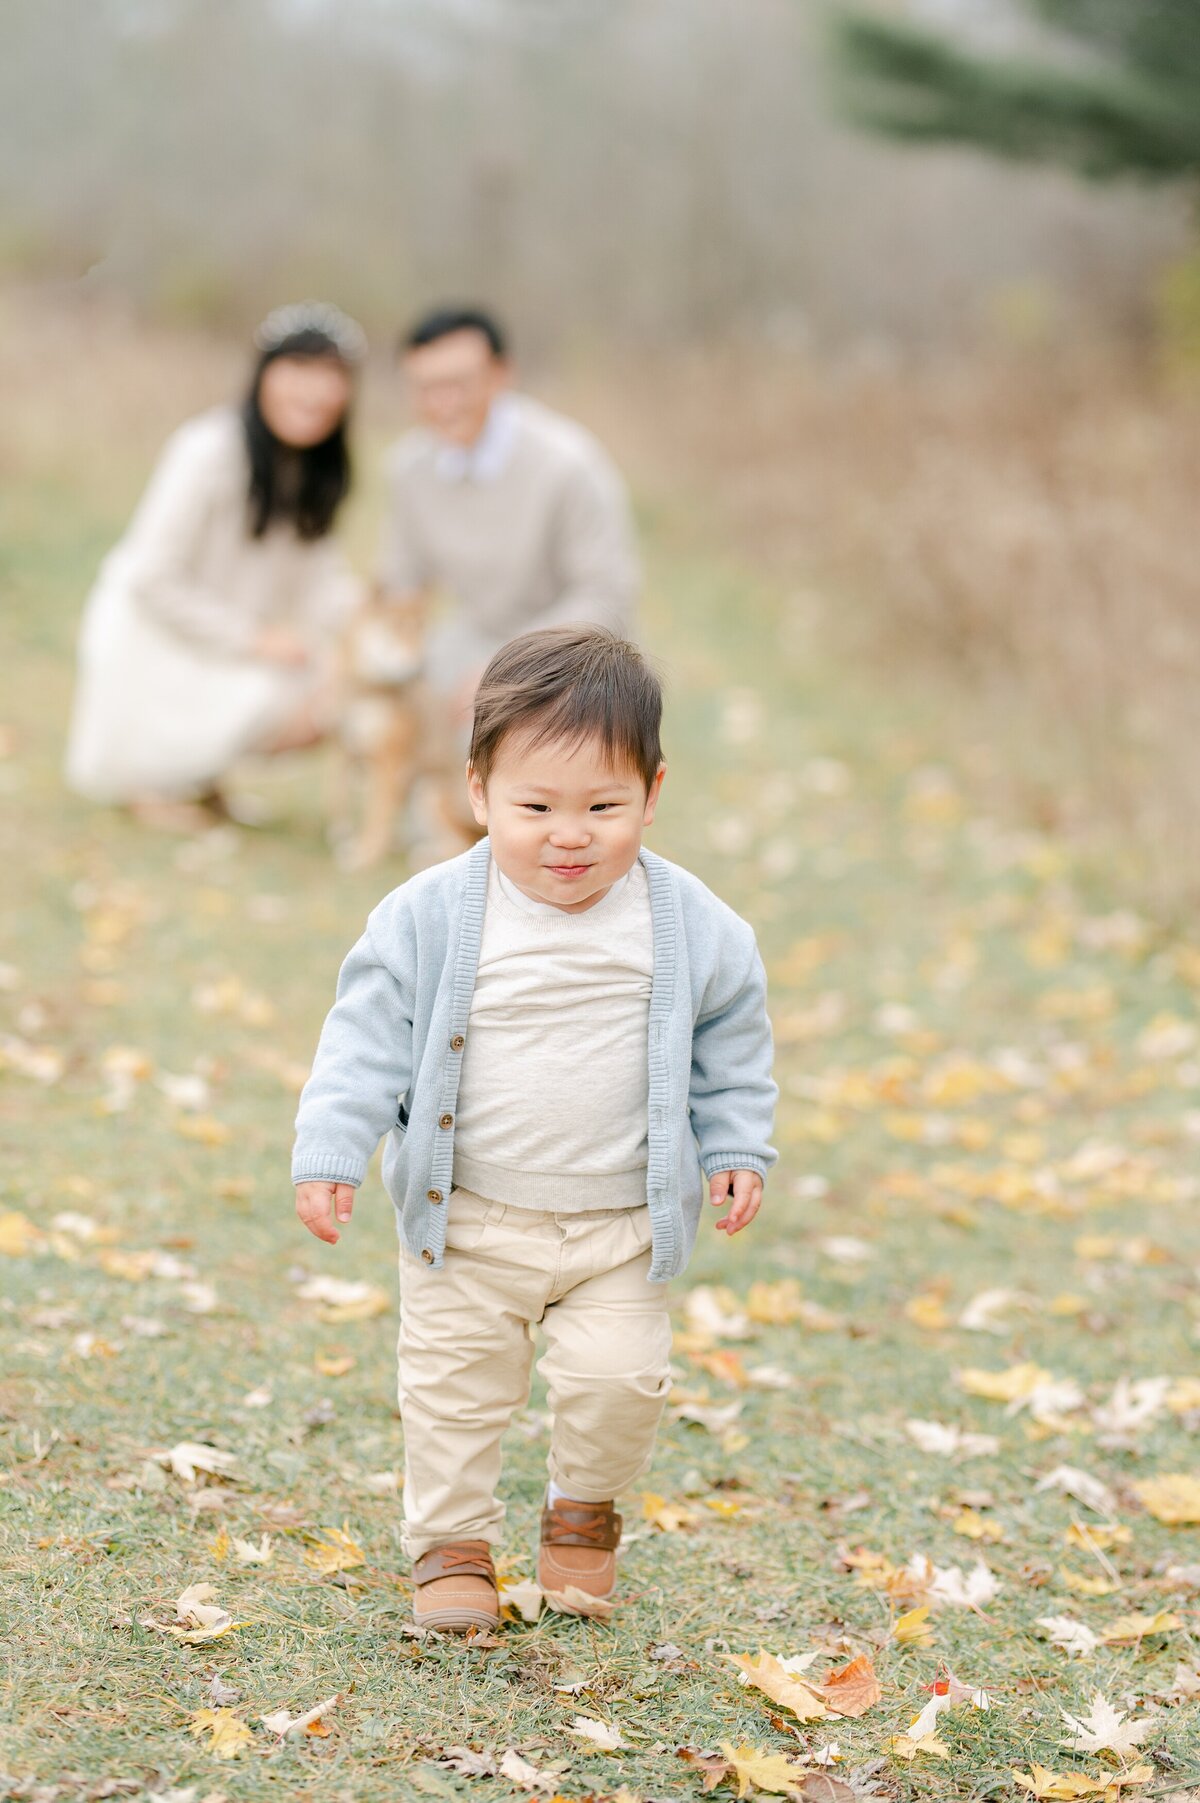 Little boy runs toward the camera while his parents are crouched down in the background